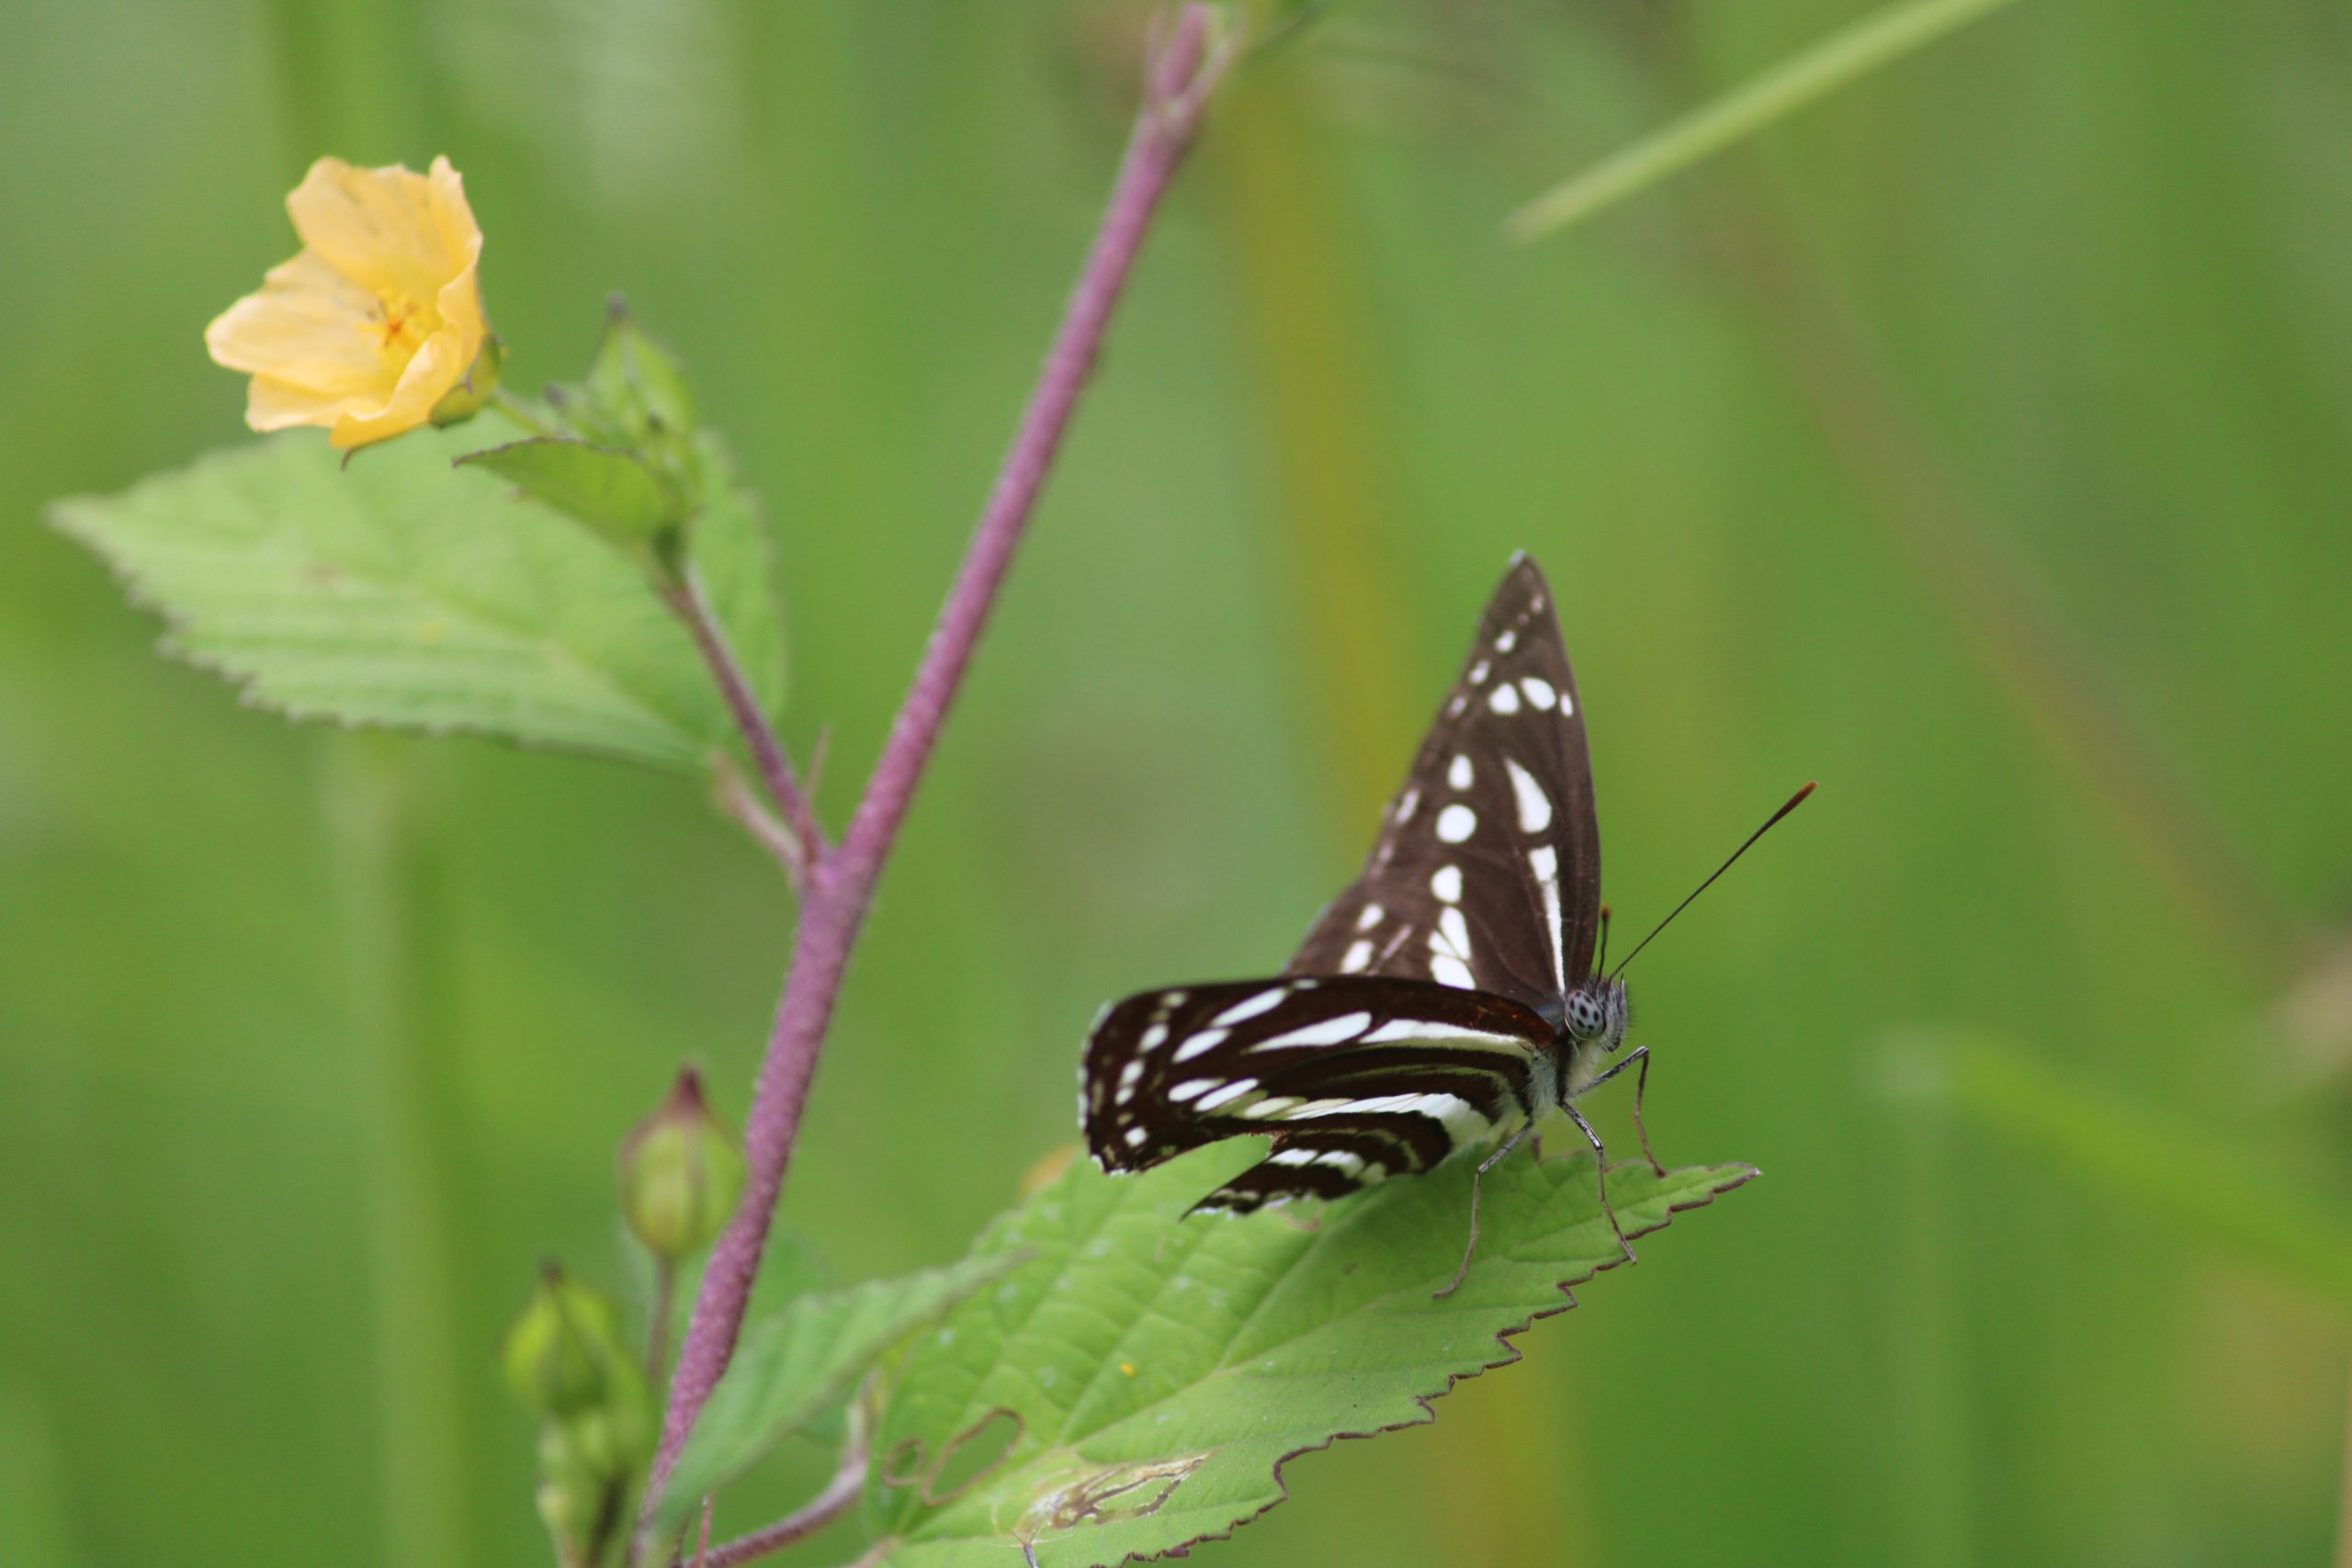 A butterfly on a plant leaf